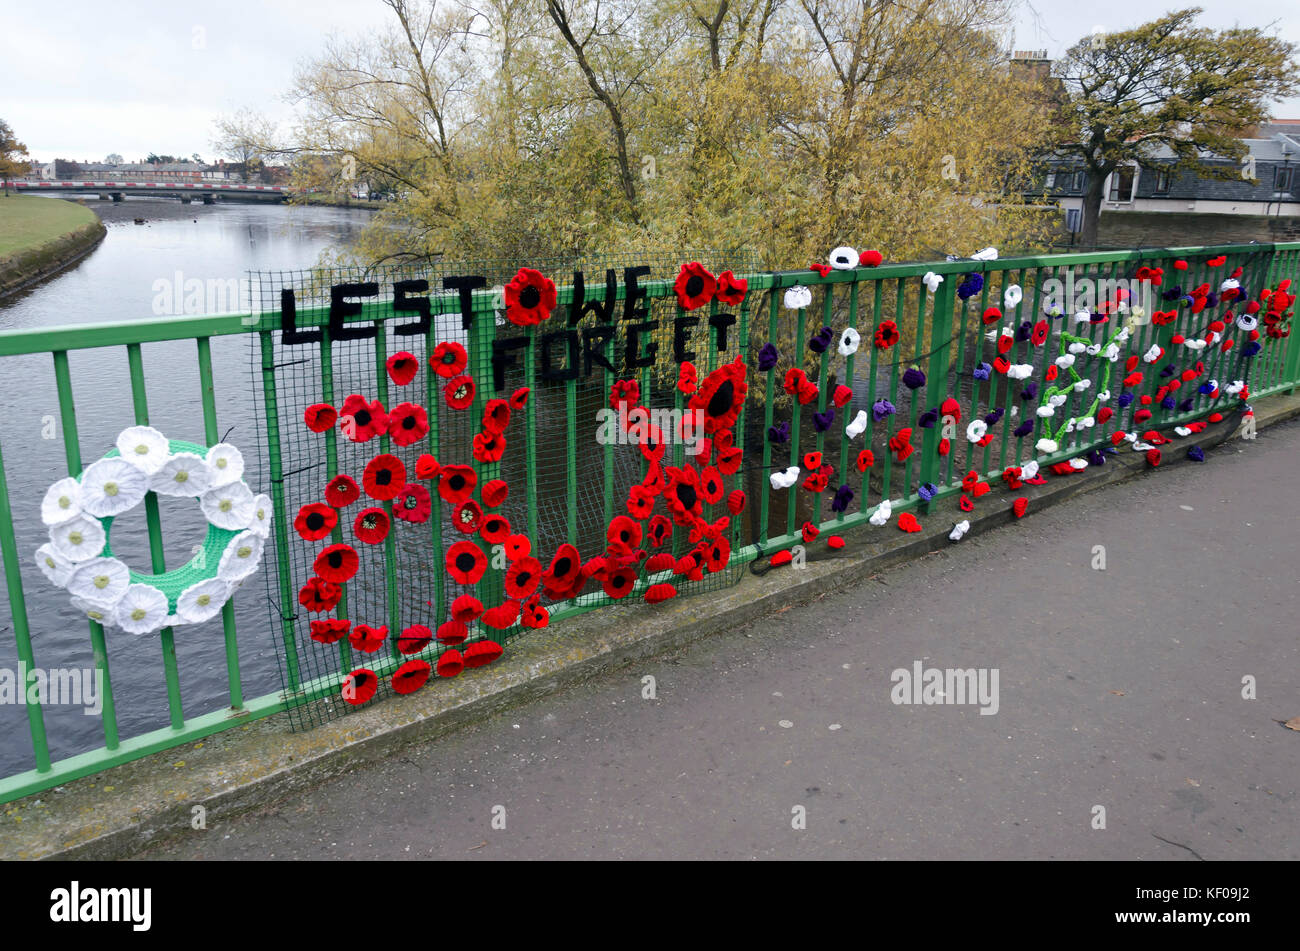 Knitted remembrance poppies on the railings of a bridge in Musselburgh, near Edinburgh, Scotland. Stock Photo